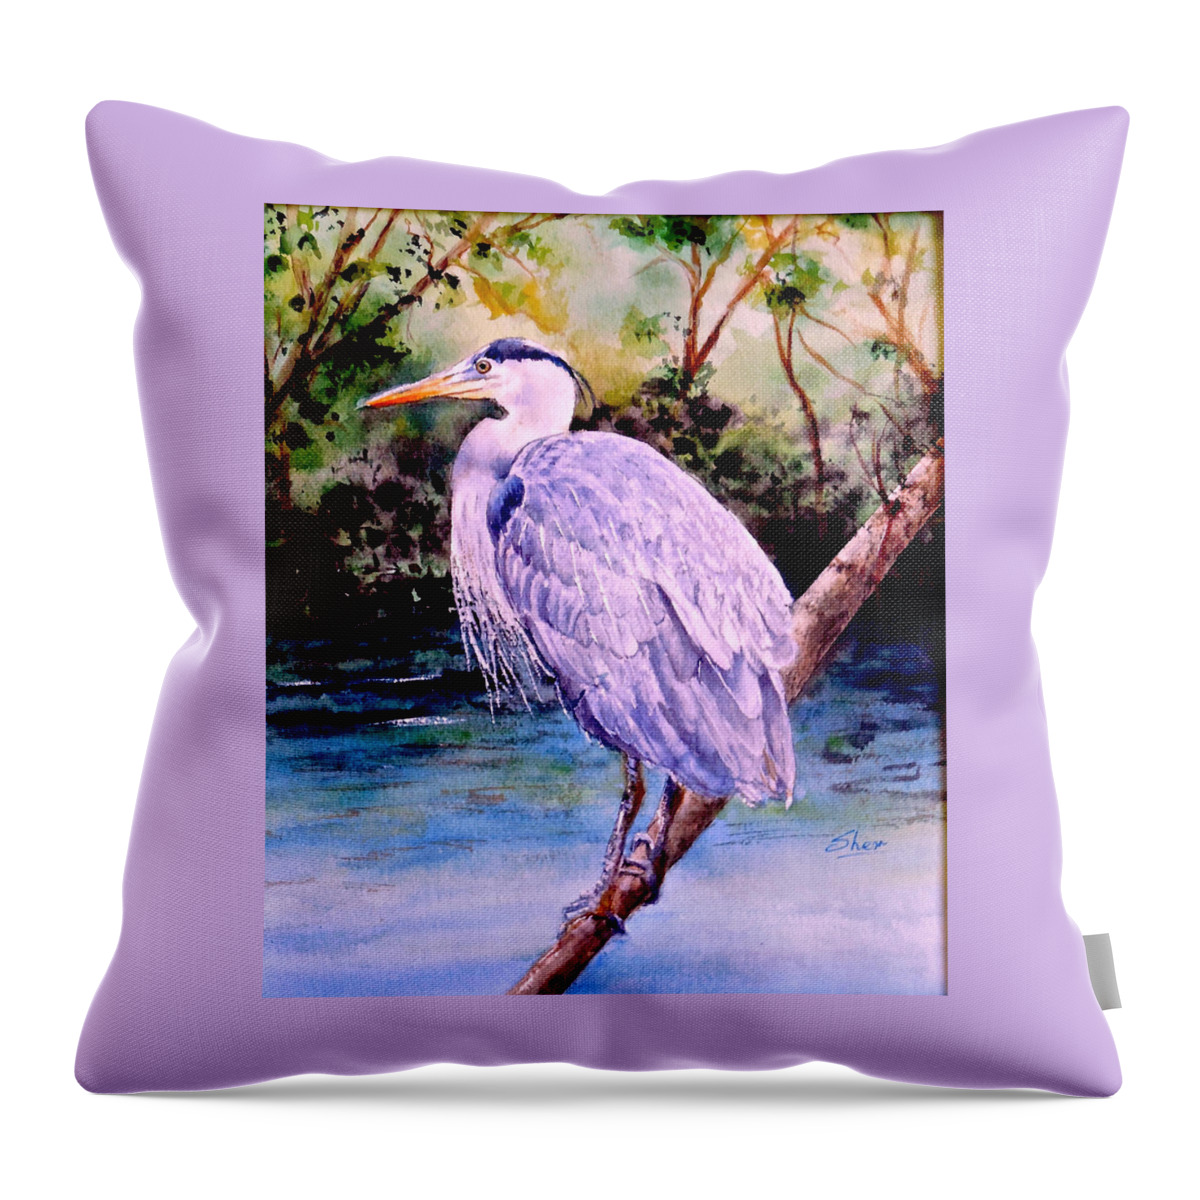 Watercolour Painting Throw Pillow featuring the painting On the Lookout by Sher Nasser